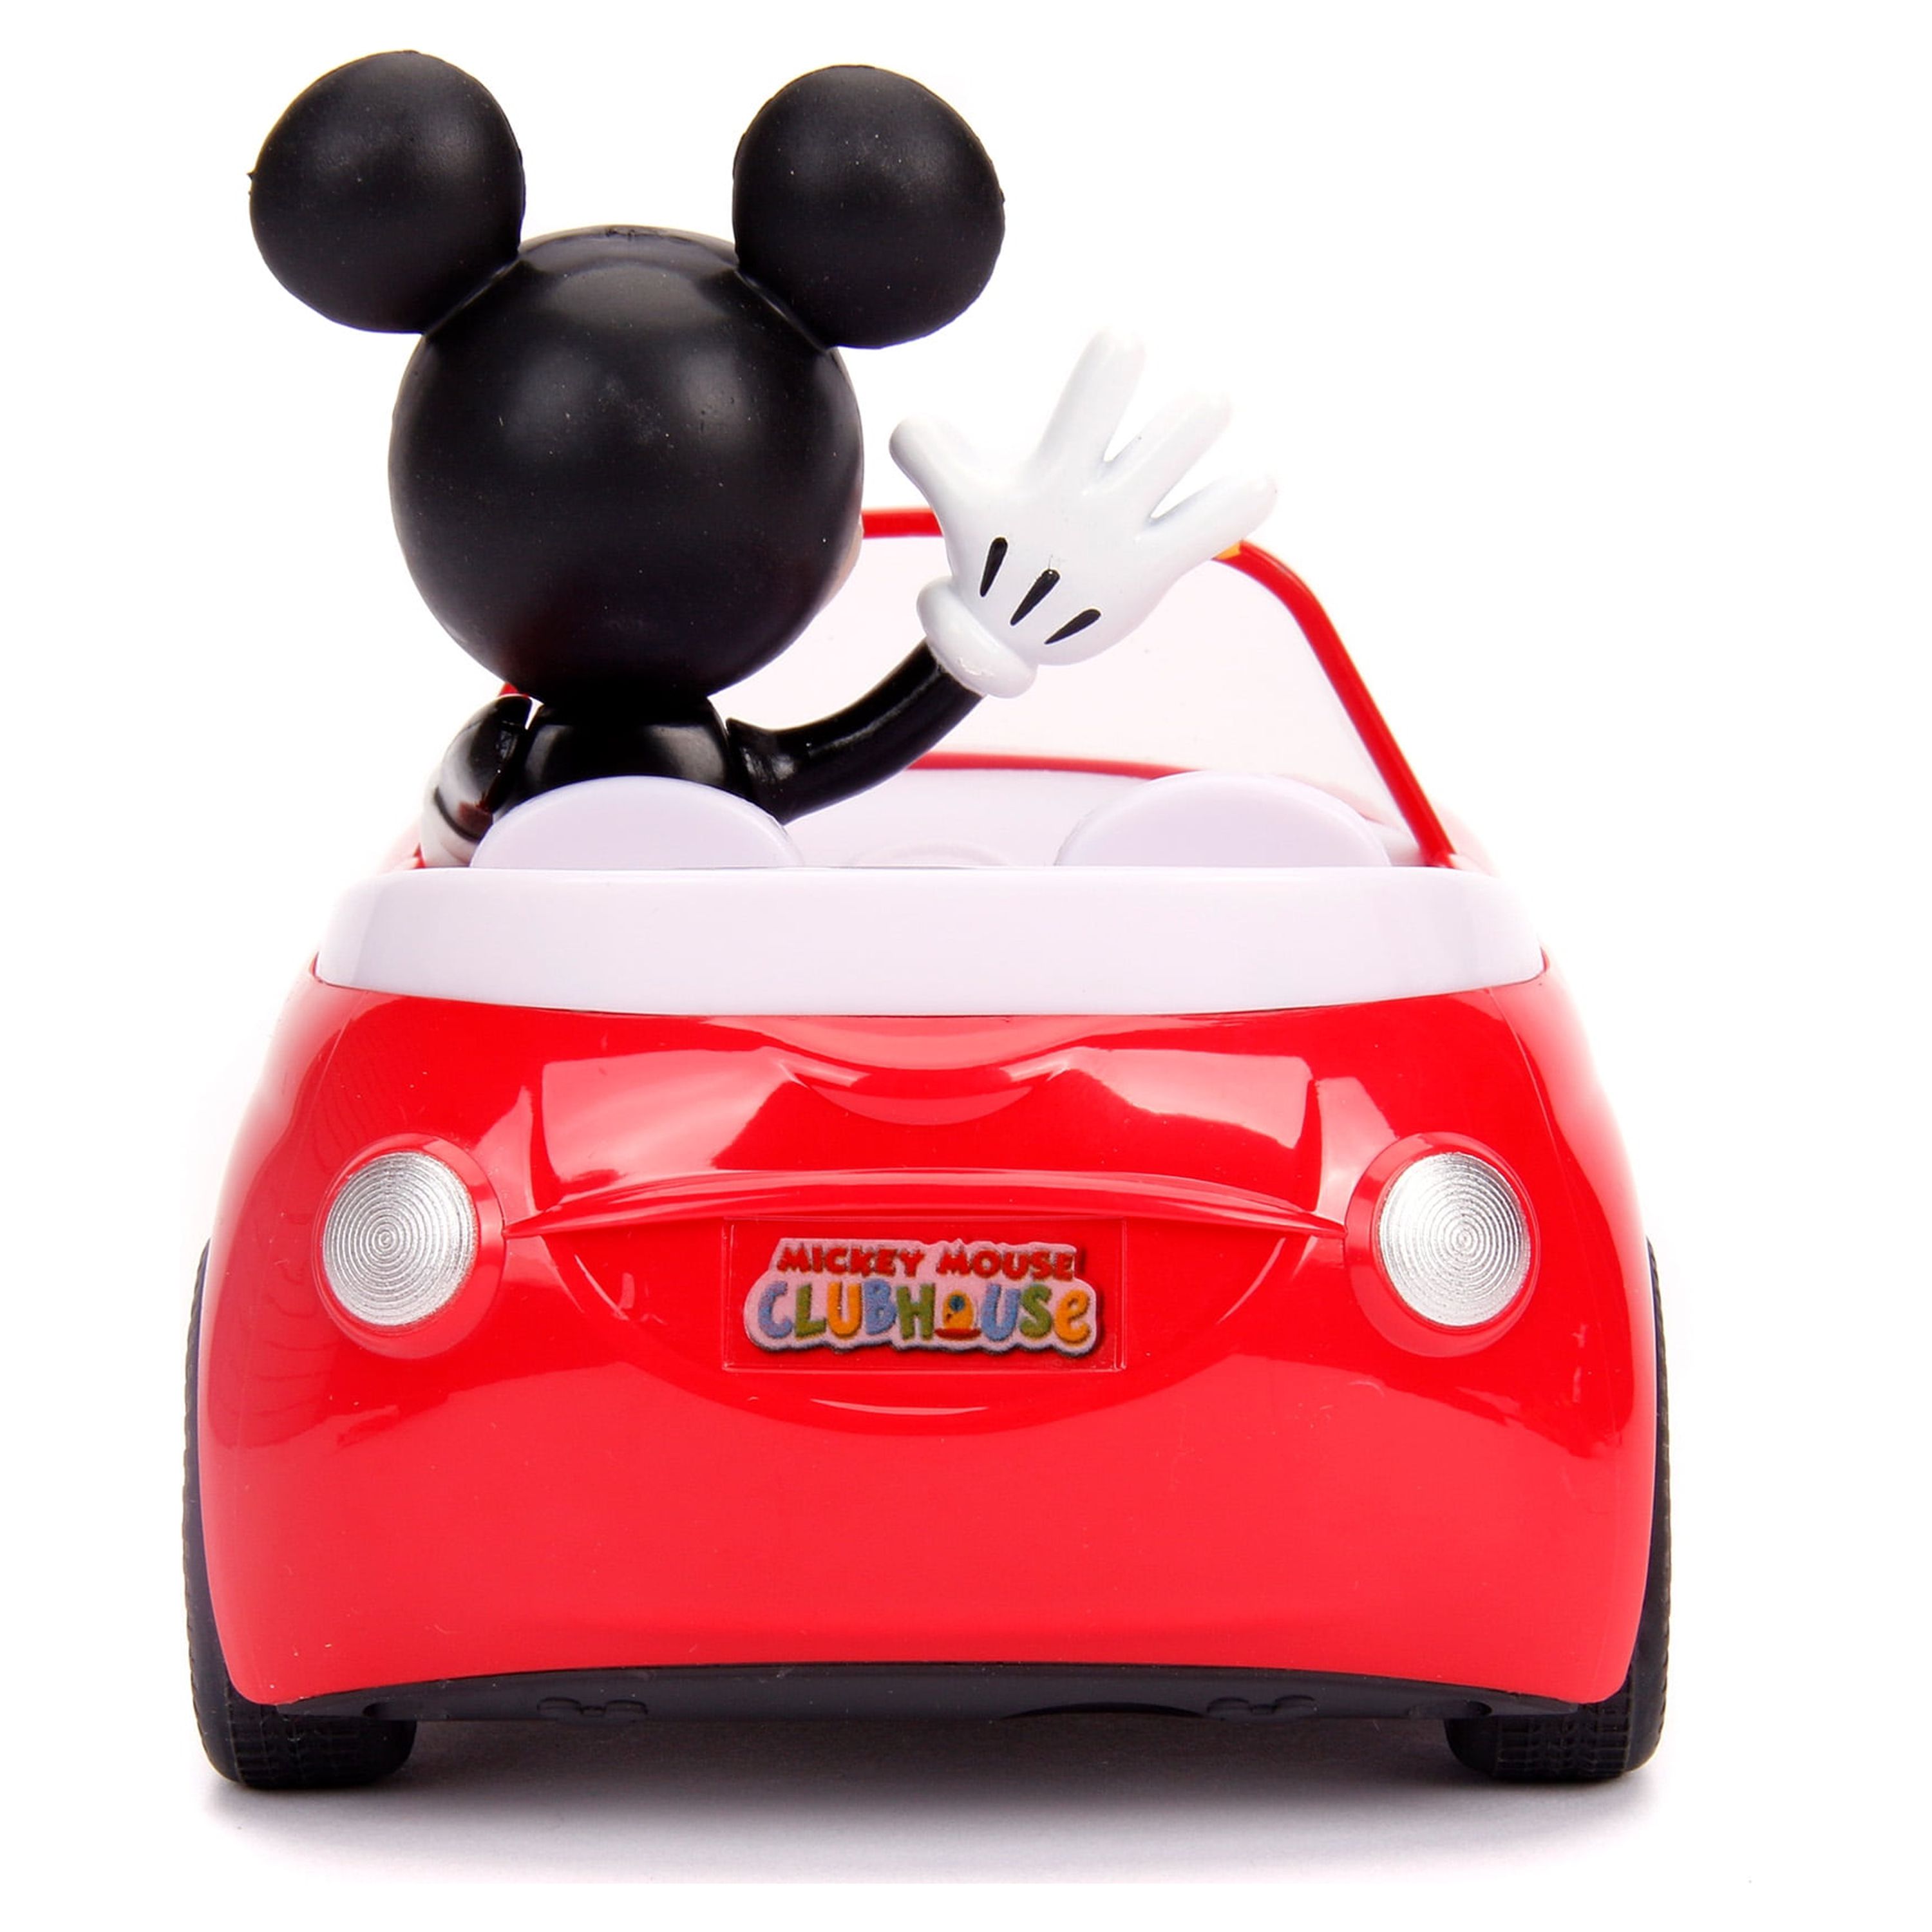 Jada Toys Classic Roadster Mickey Mouse Battery-Powered RC Car(Red) - image 5 of 6